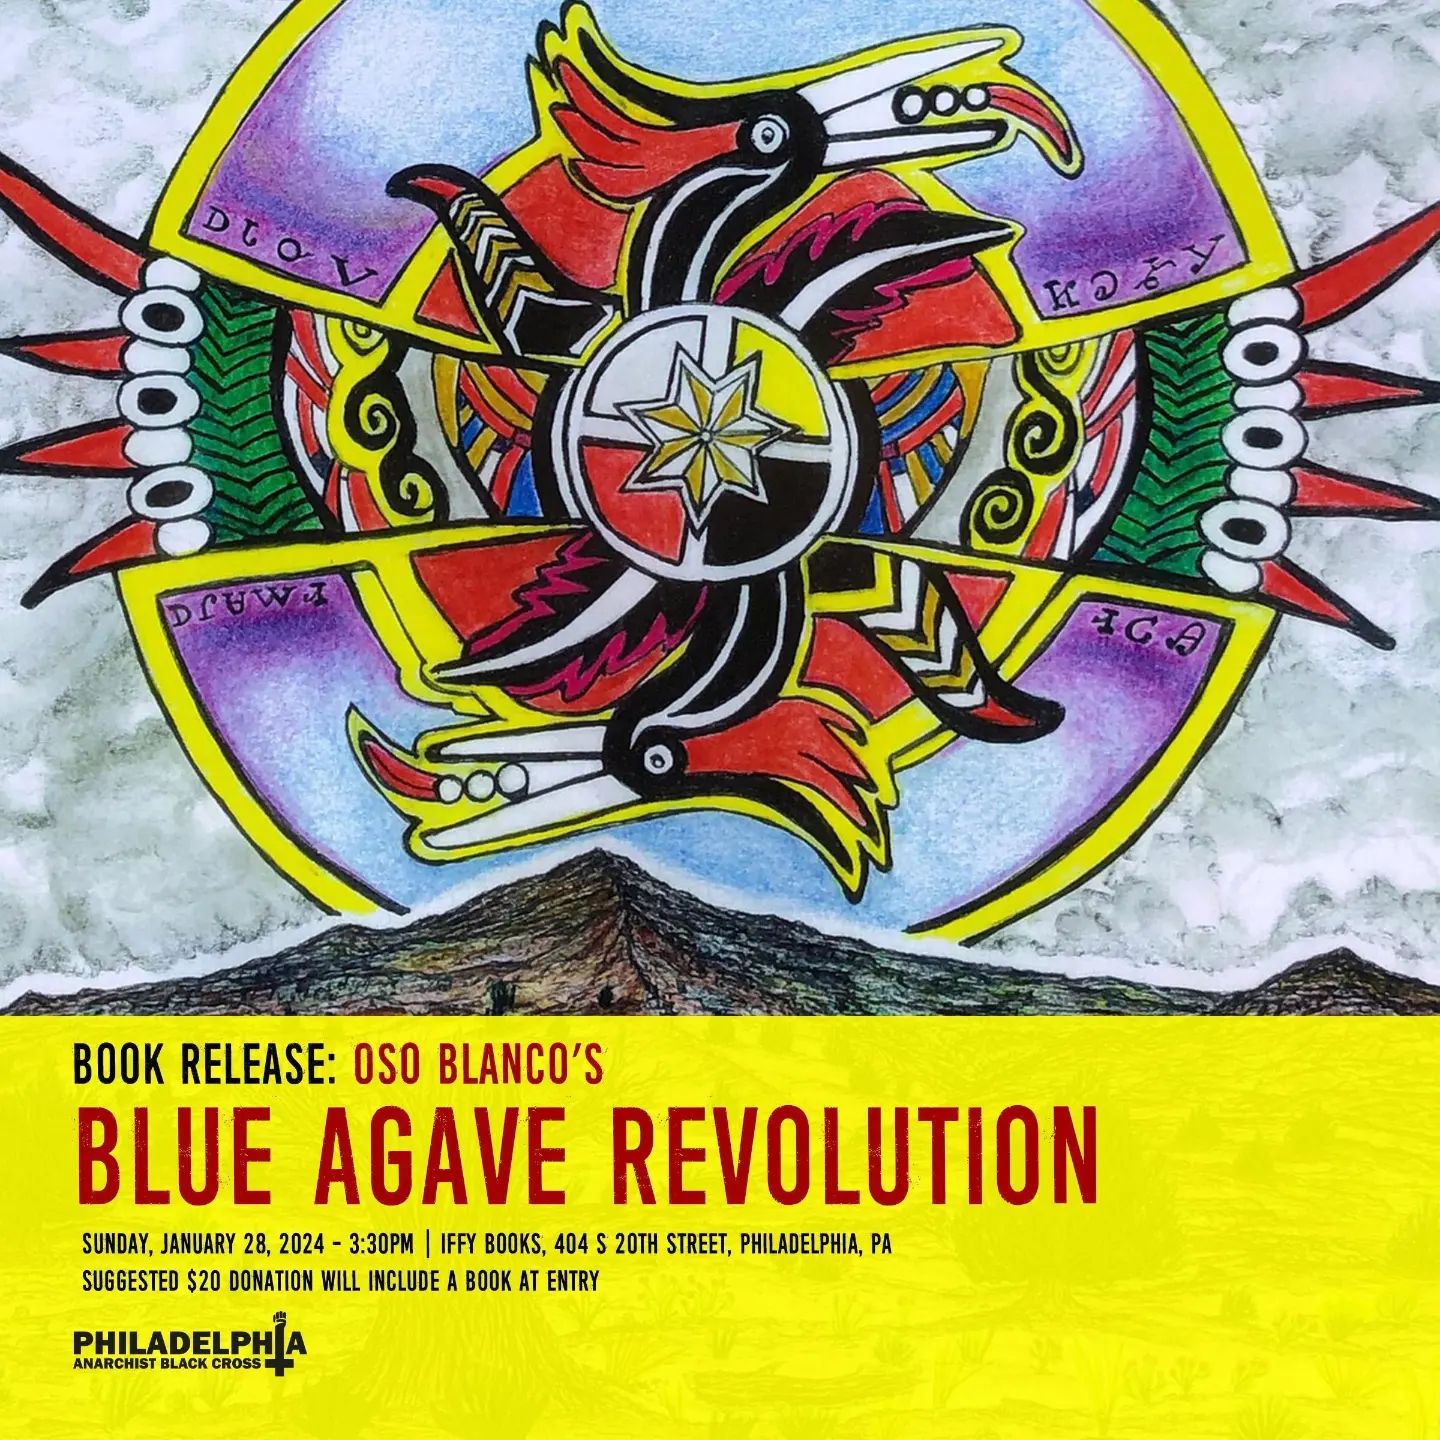 Flyer featuring Indigenous artwork by Oso Blanco, of two birds over a desert and under a sky full of clouds. The art piece is titled "Thunderboys Over Desert." Below the art is text reading "Book release: Oso Blanco's Blue Agave Revolution. Sunday, January 28, 2024. 3:30pm. Iffy Books, 404 S. 20th Street. Philadelphia, PA. Suggested $20 donation will include a book at entry." On the bottom left is Philly ABC banner logo. The banner logo spells out Philadelphia Anarchist Black Cross with a cross and fist that stand in place of the "I" in "Philadelphia"